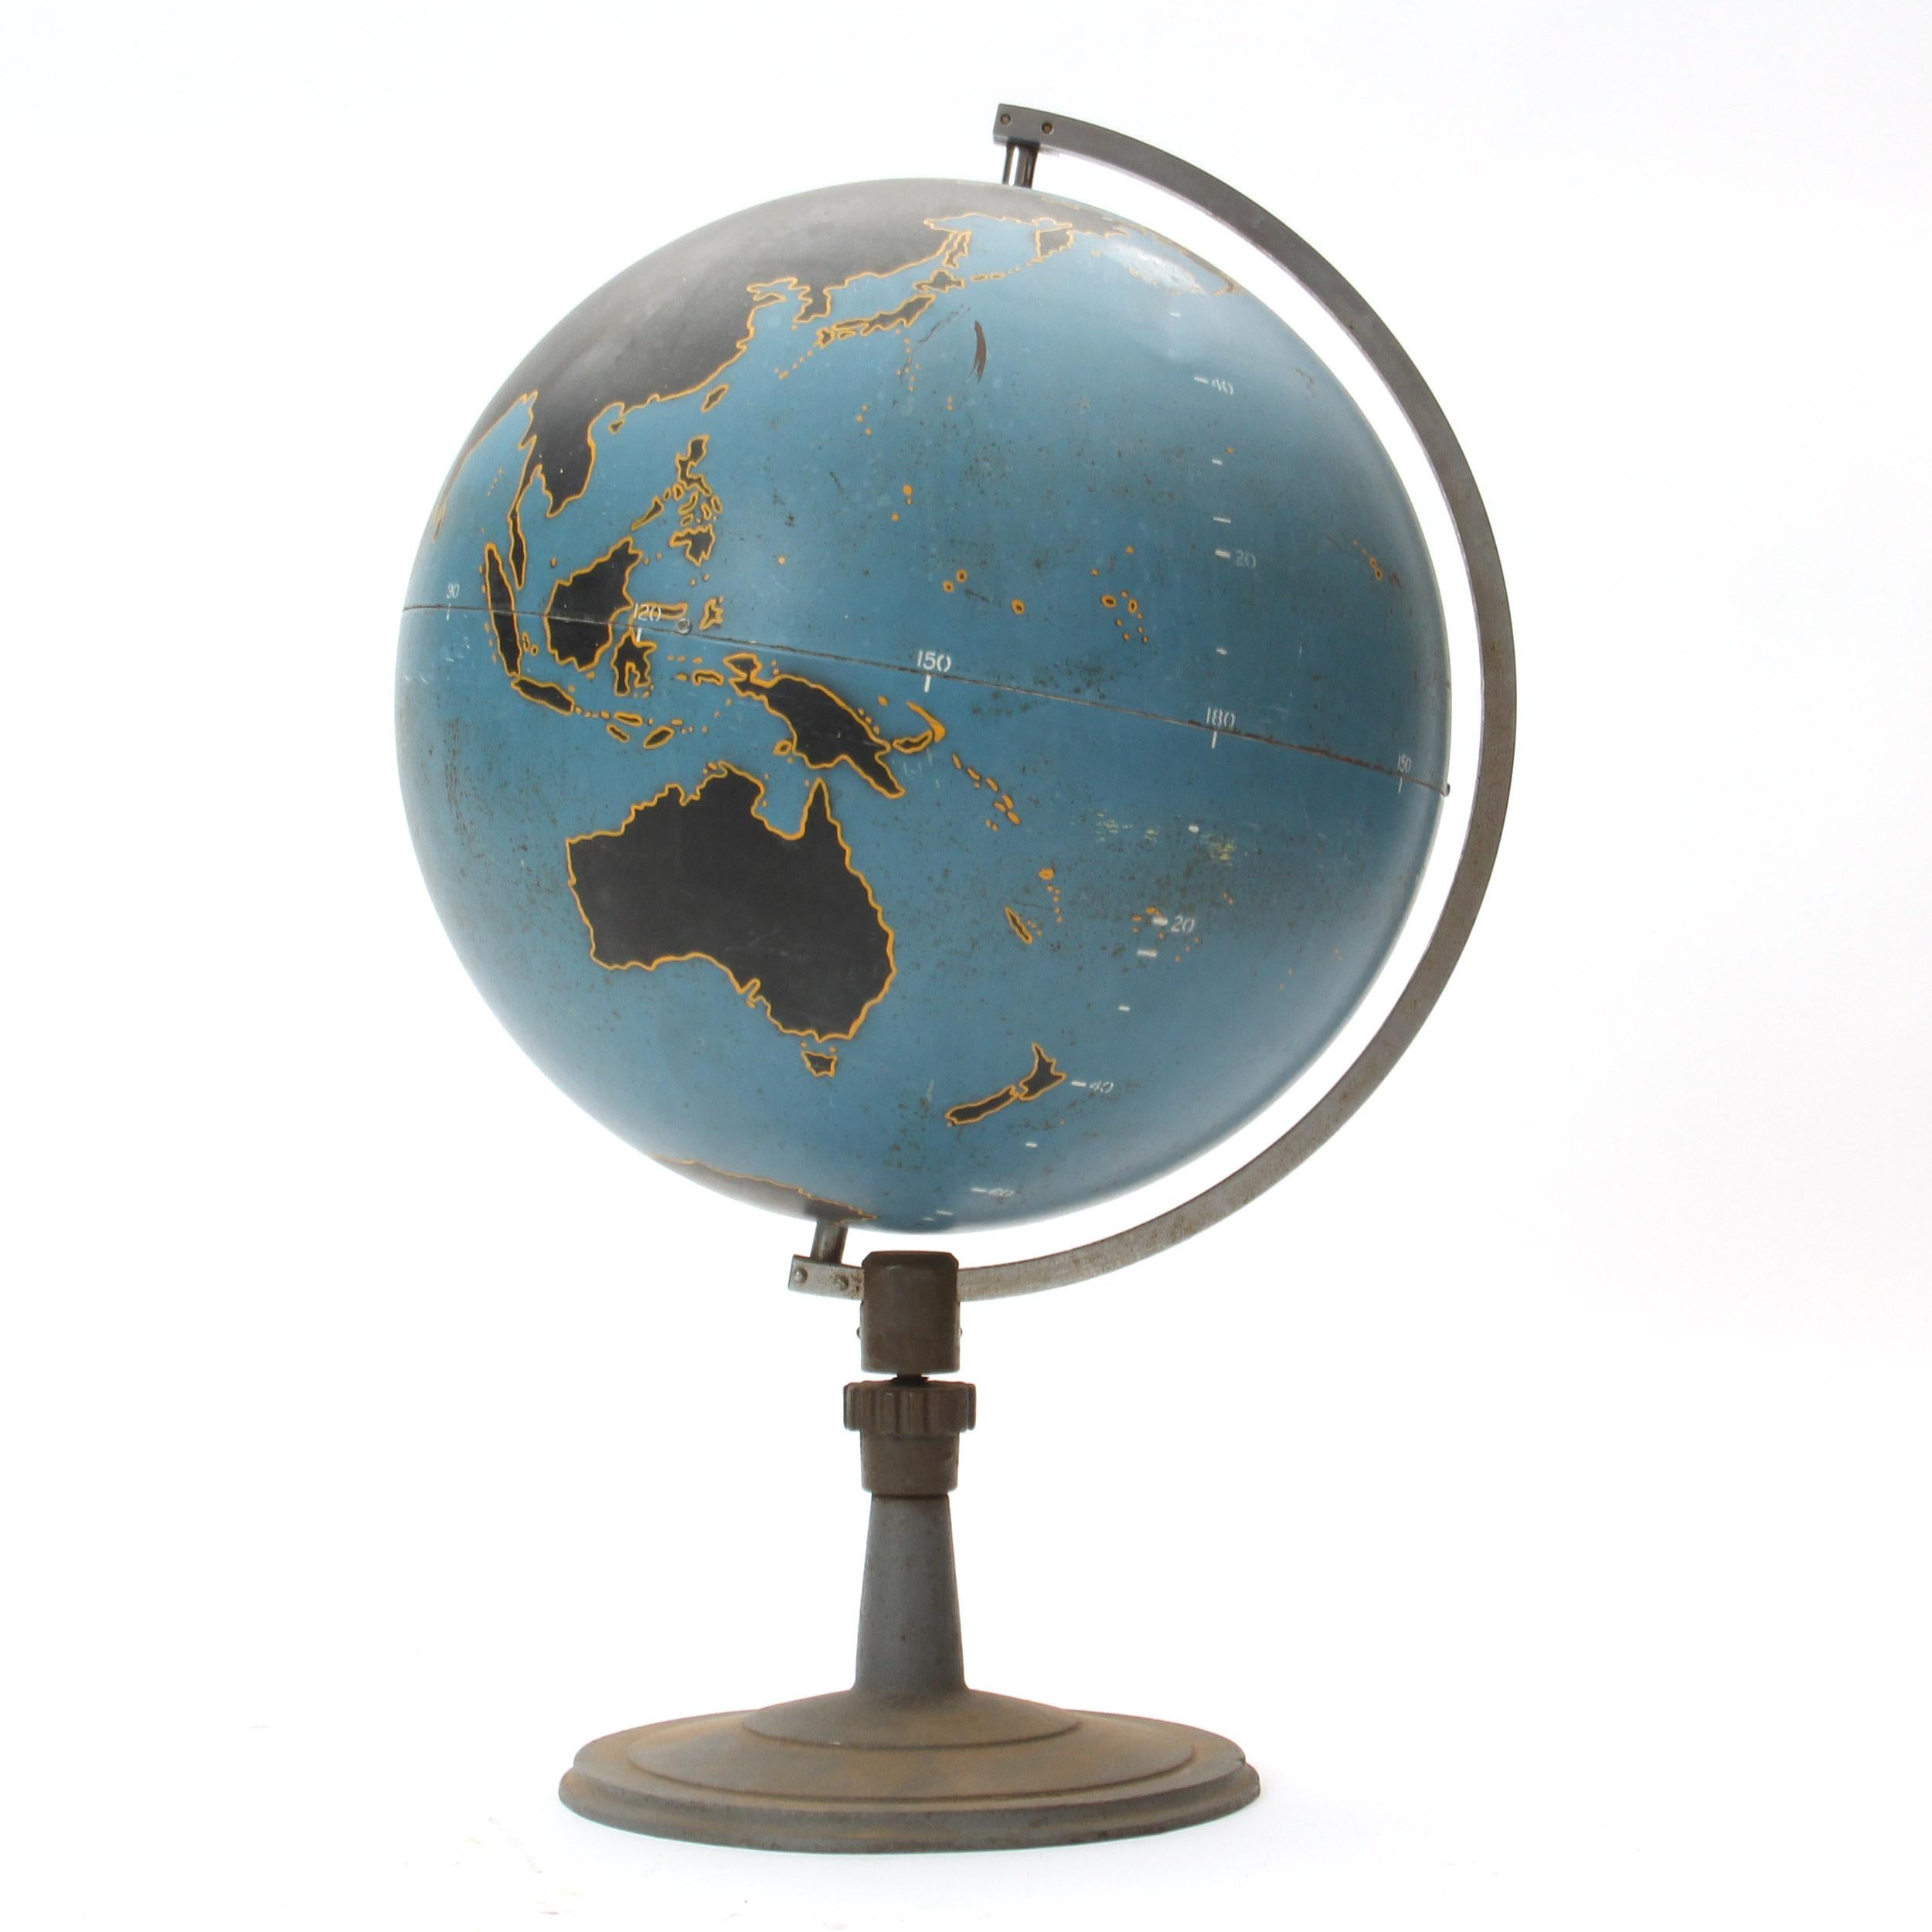 A graphic and finely fabricated spun steel teaching globe mounted on a weighted stand.